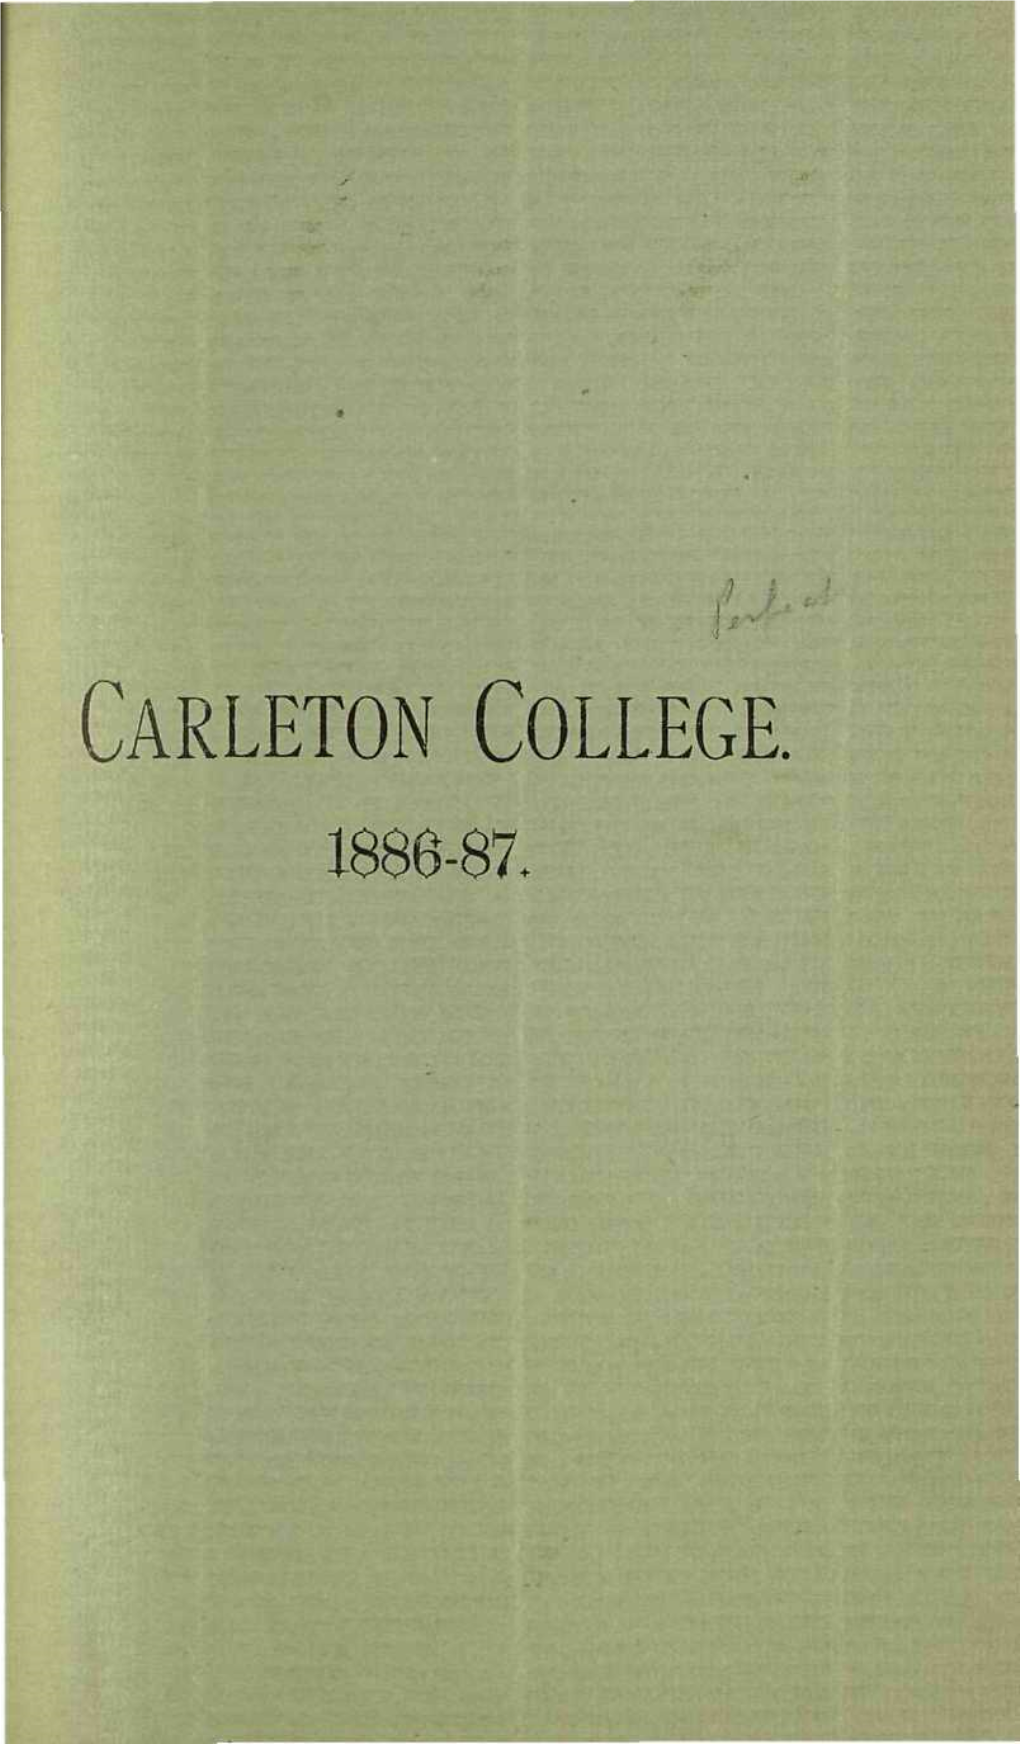 Carleton College Digital Collections